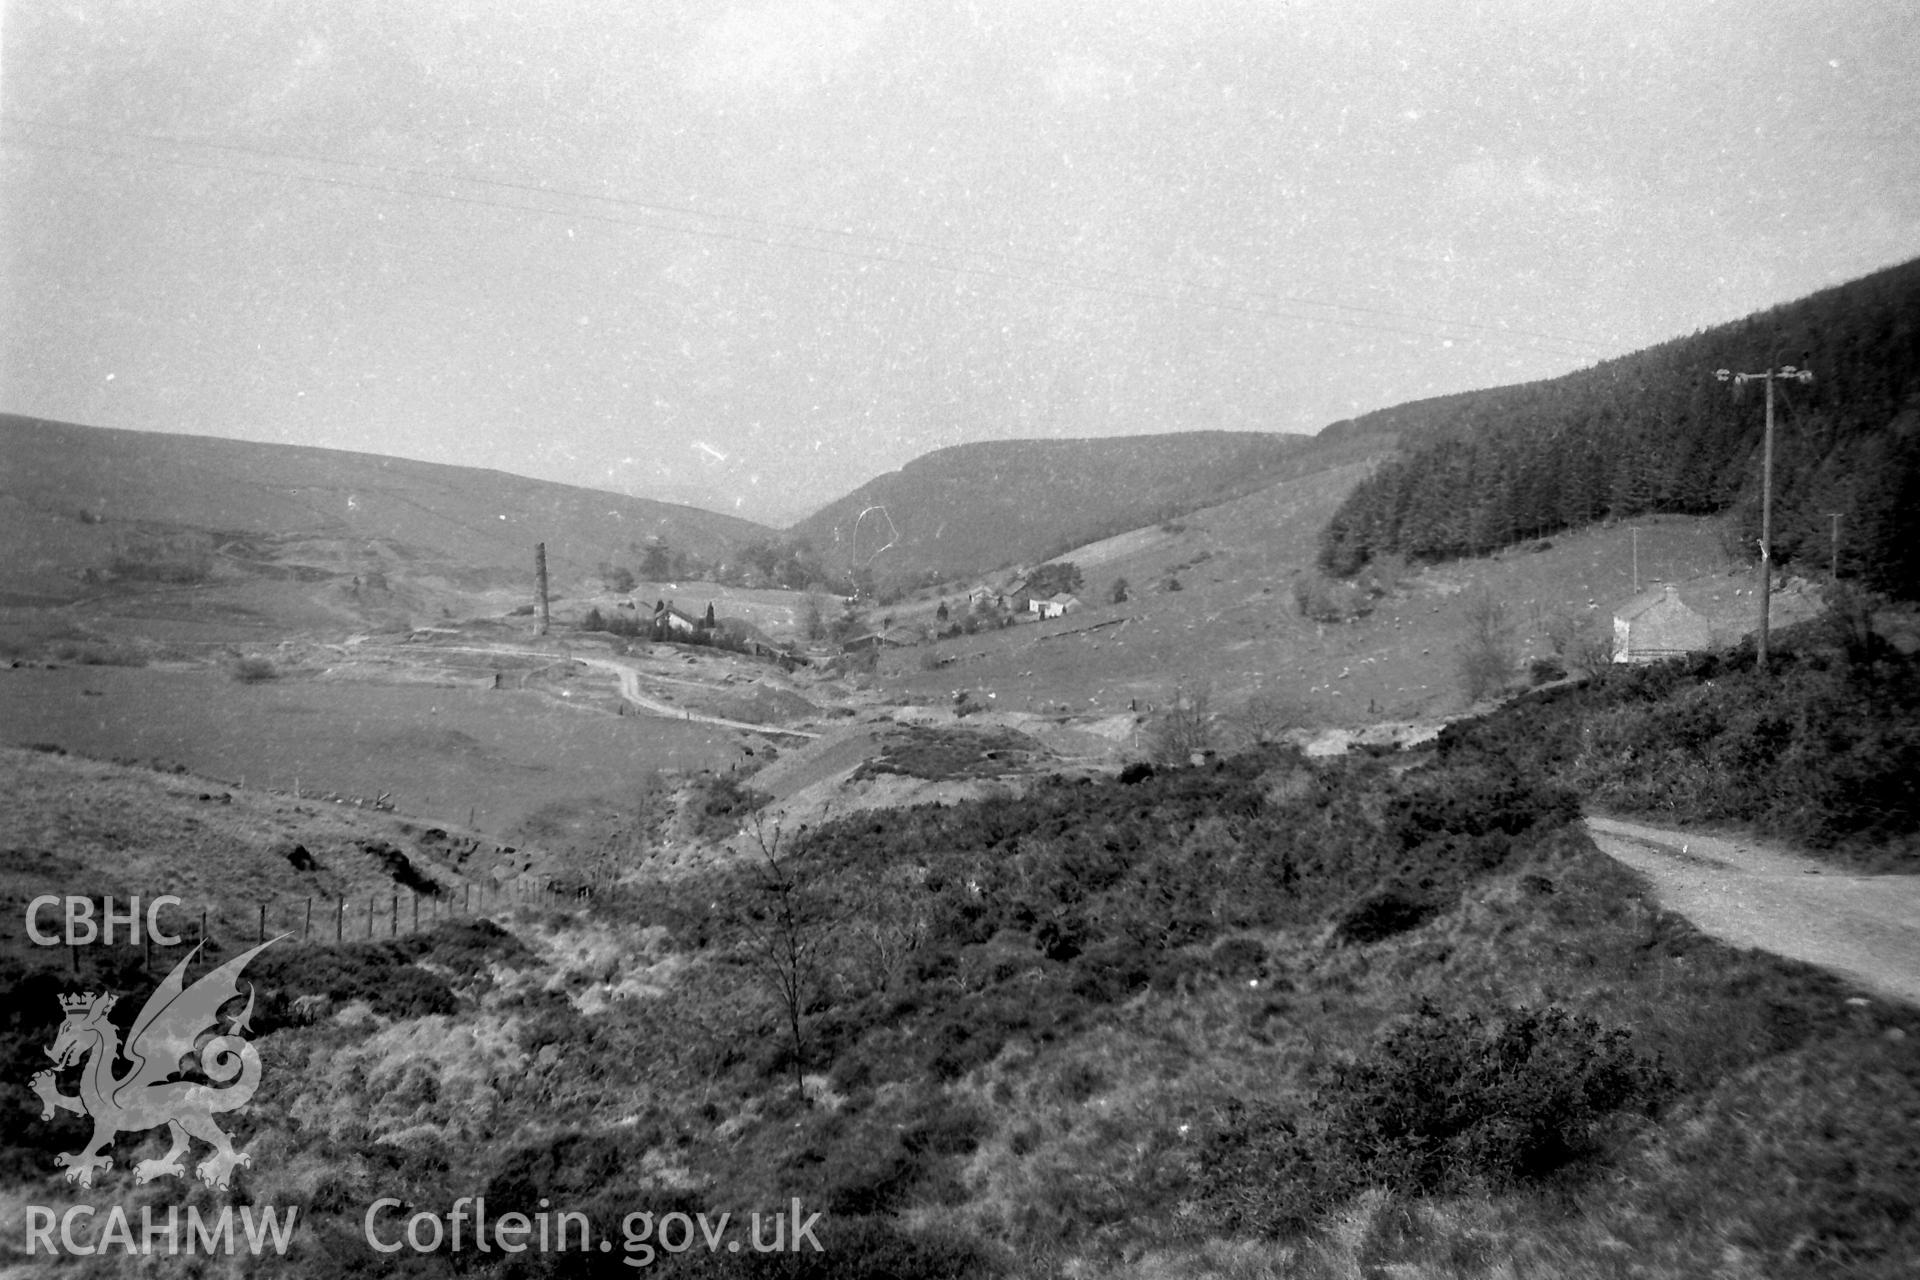 Digitised black and white photograph showing distant view of Cwmsymlog, including the masonry chimney stack associated with East Darren Lead Mine. Photographed by Martin Davies as part of his Bachelor of Architecture at the University of Nottingham, 1979.